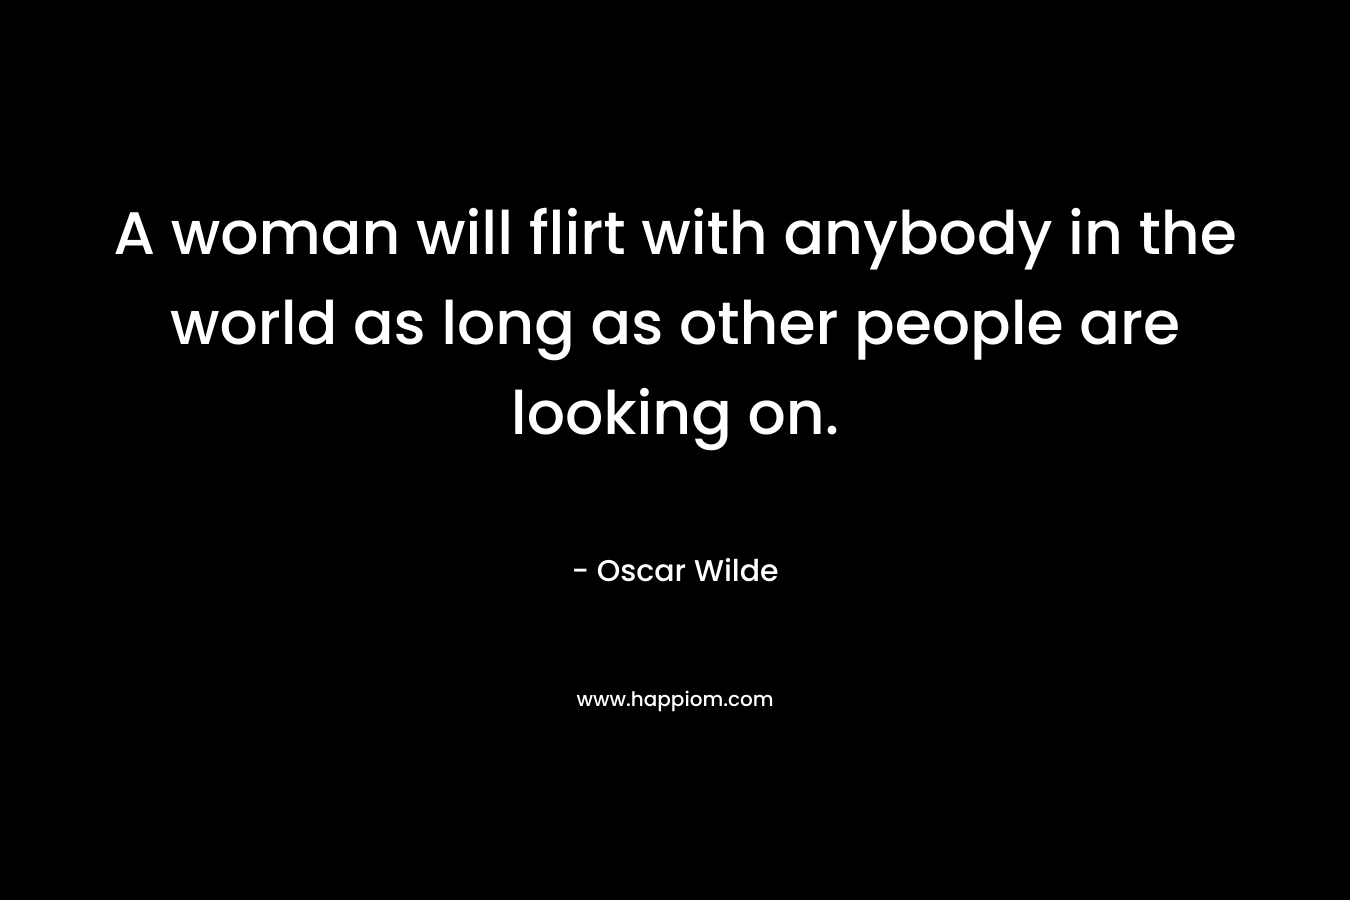 A woman will flirt with anybody in the world as long as other people are looking on.